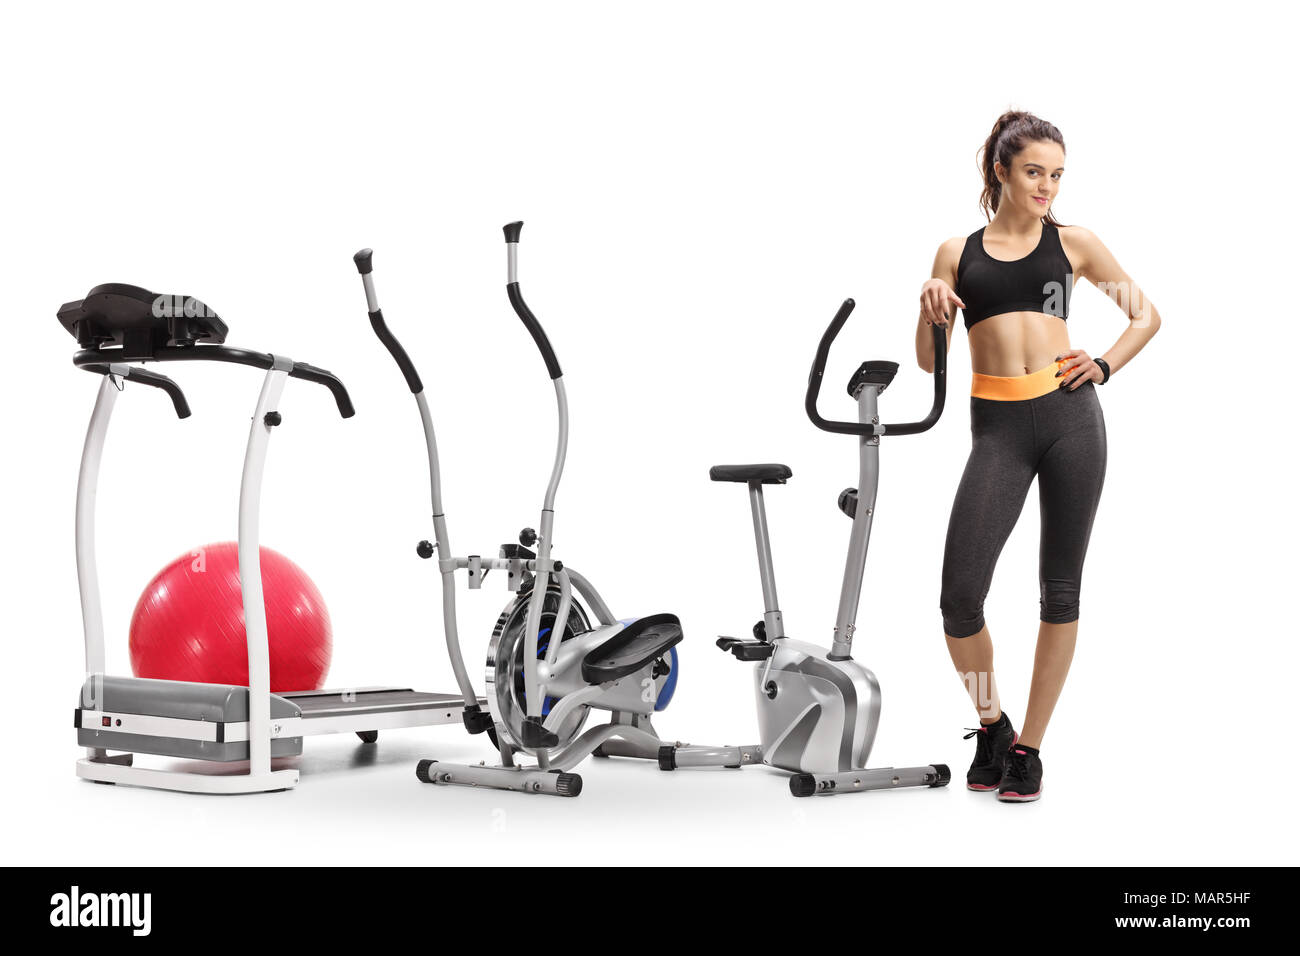 Full length portrait of a fitness woman with exercise machines isolated on white background Stock Photo